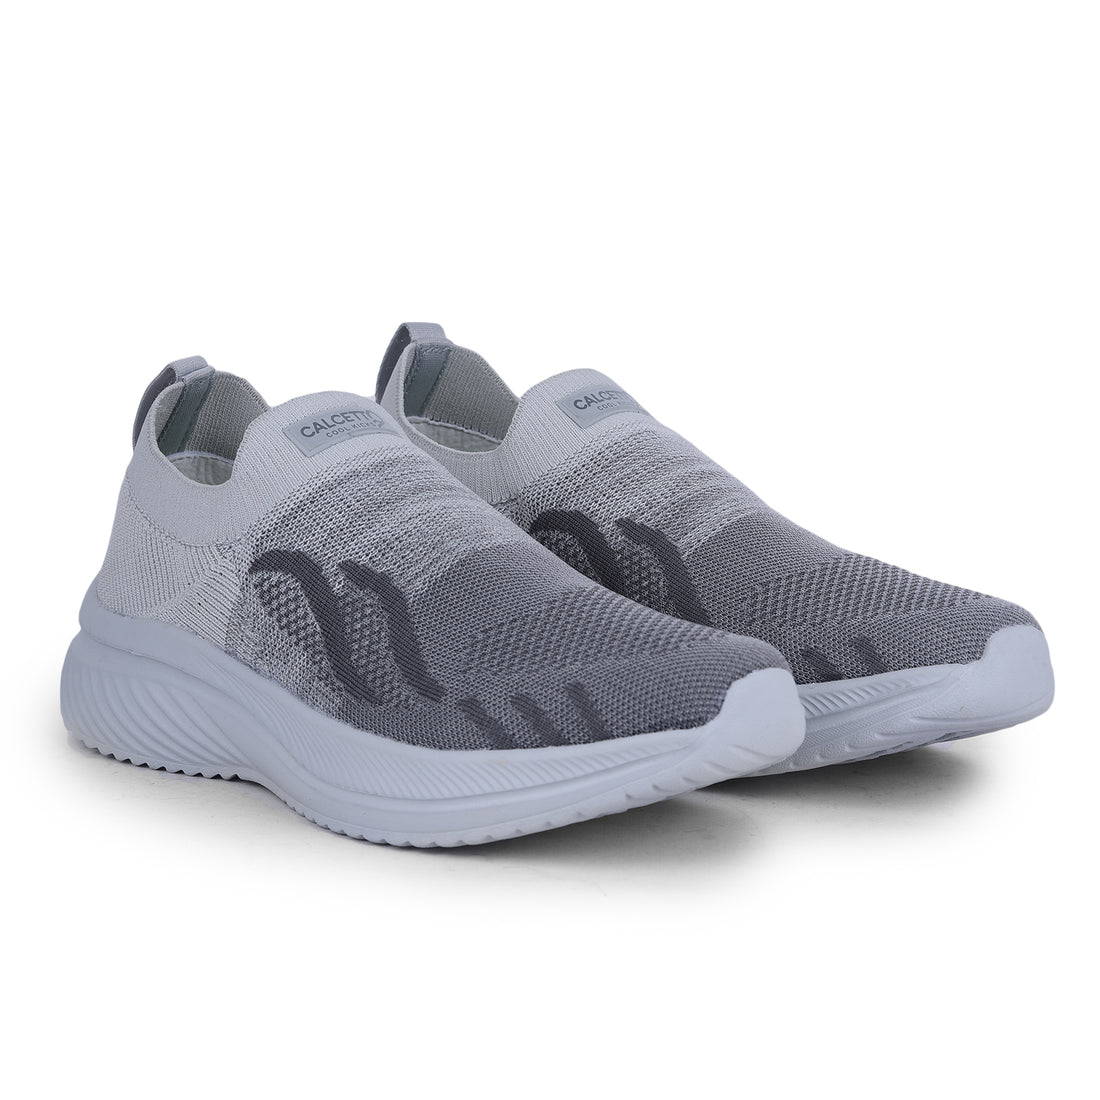 Calcetto CLT-2047 L GREY Men Running Sports Shoes